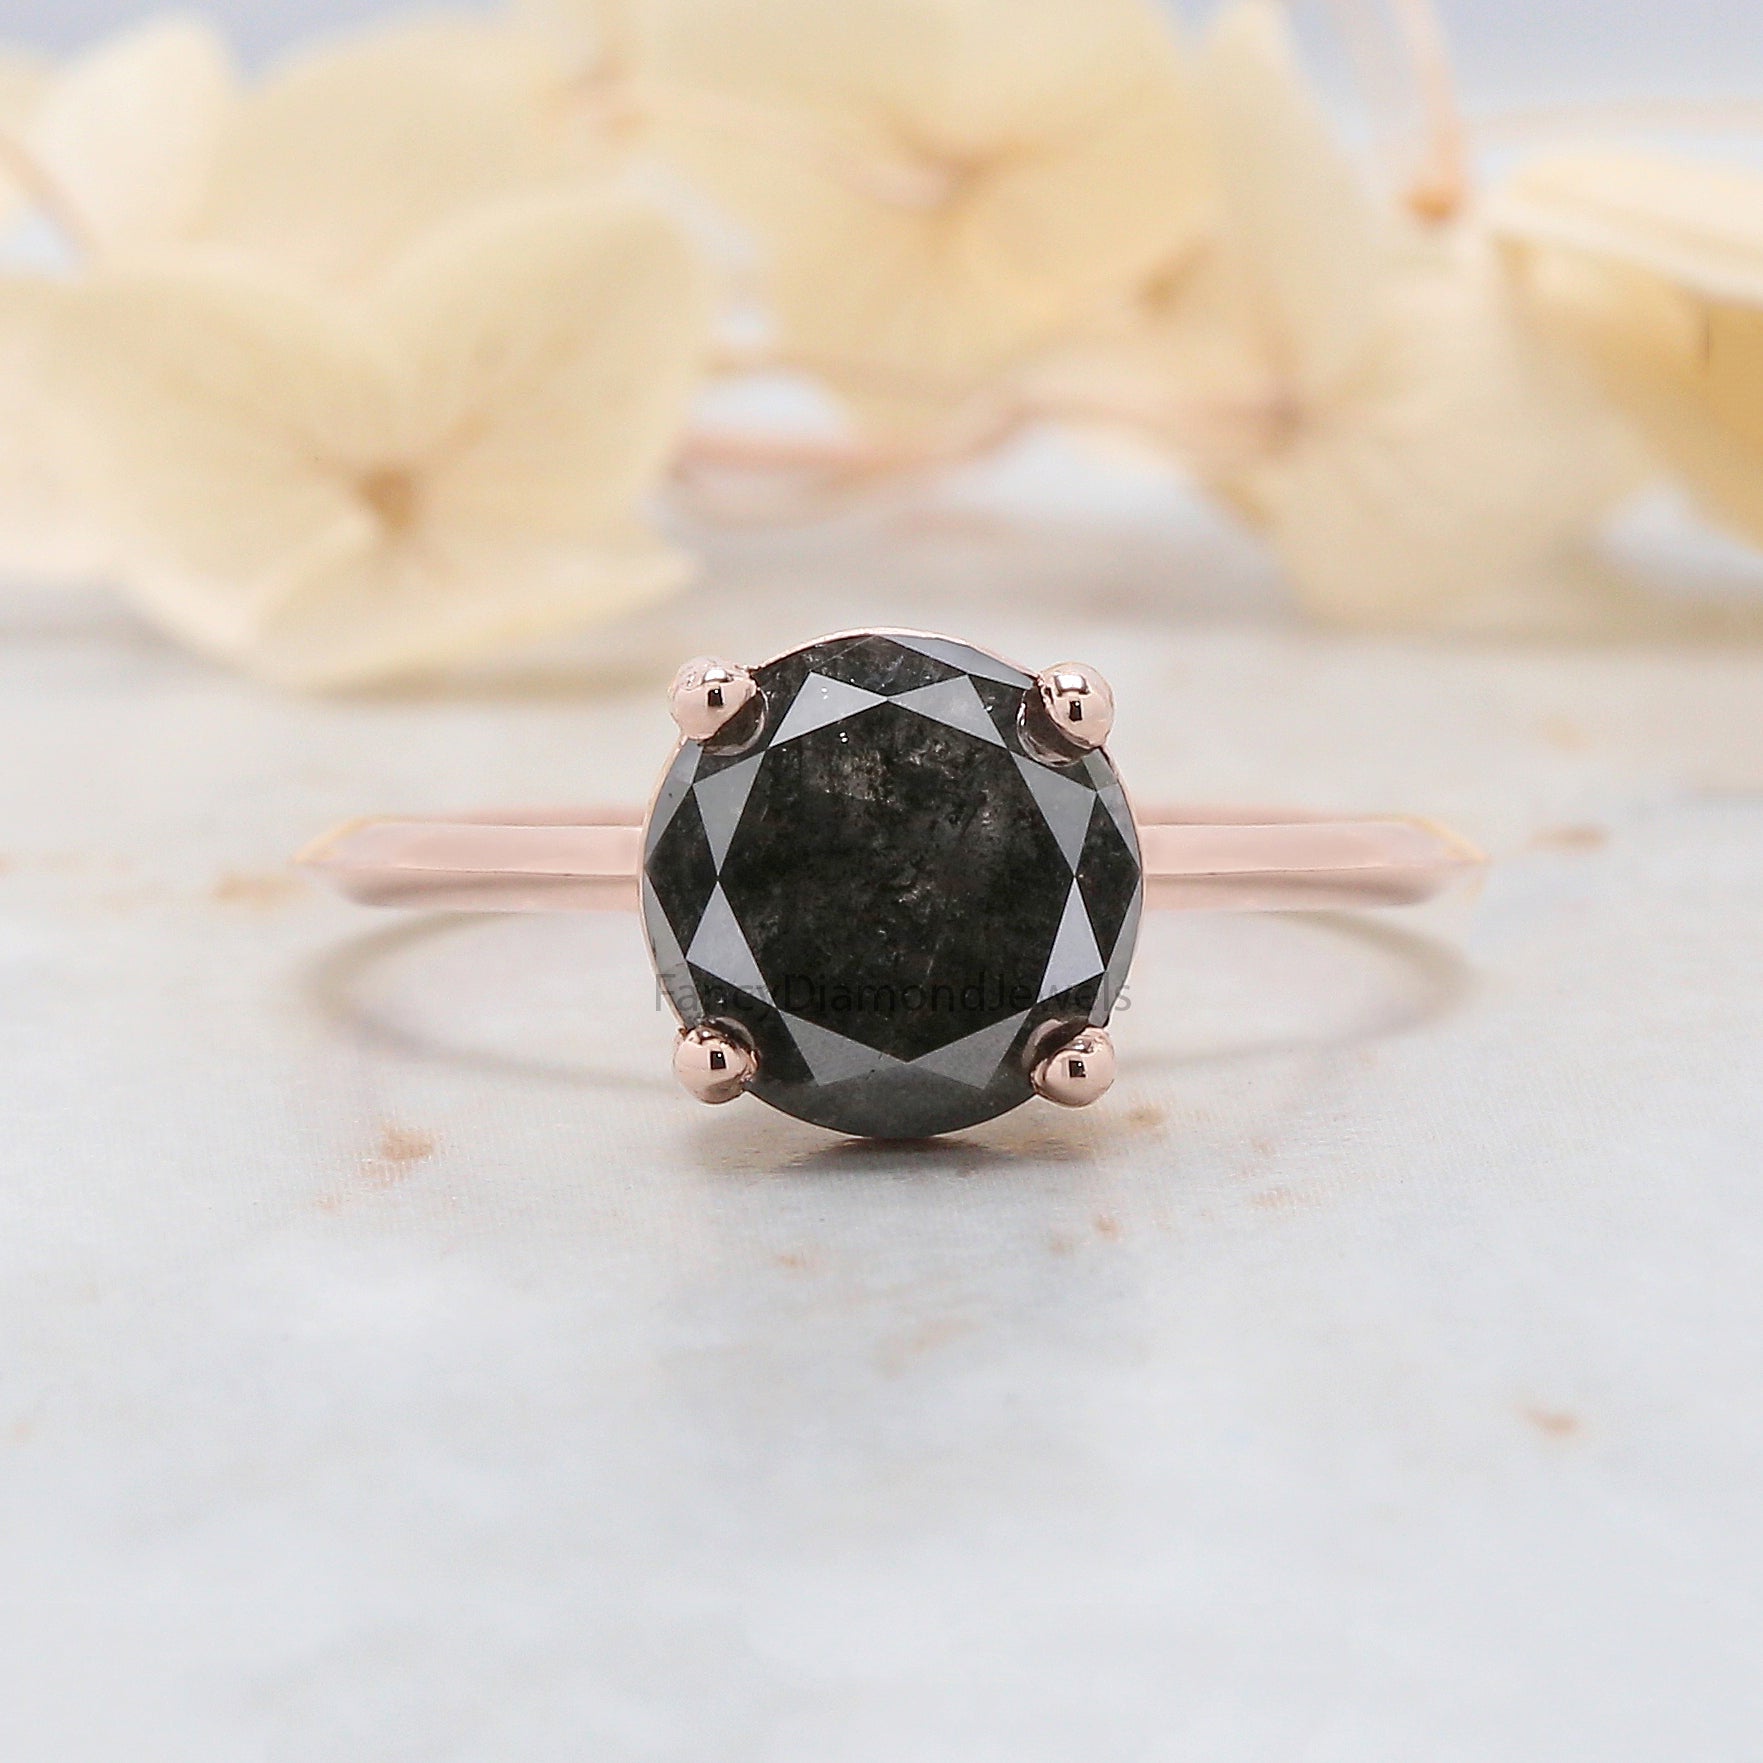 Round Cut Black Color Diamond Ring 2.59 Ct 8.30 MM Round Shape Diamond Ring 14K Solid Rose Gold Silver Engagement Ring Gift For Her QL7395